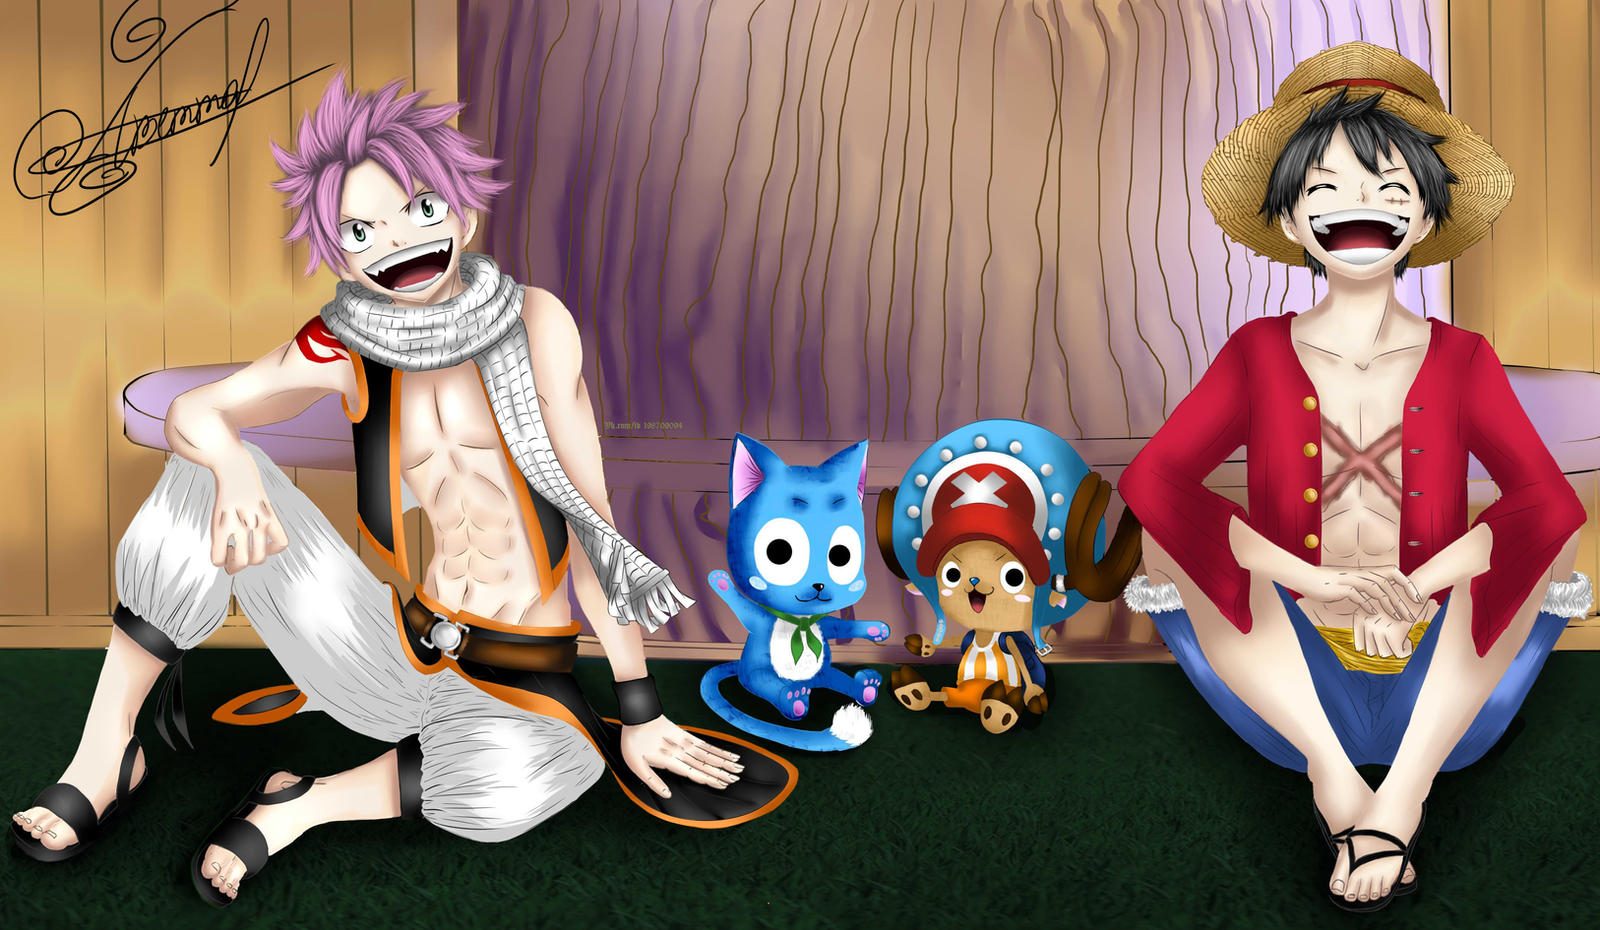 Crossover Fairy Tail And One Piece By AlexandraAvetta On DeviantArt.